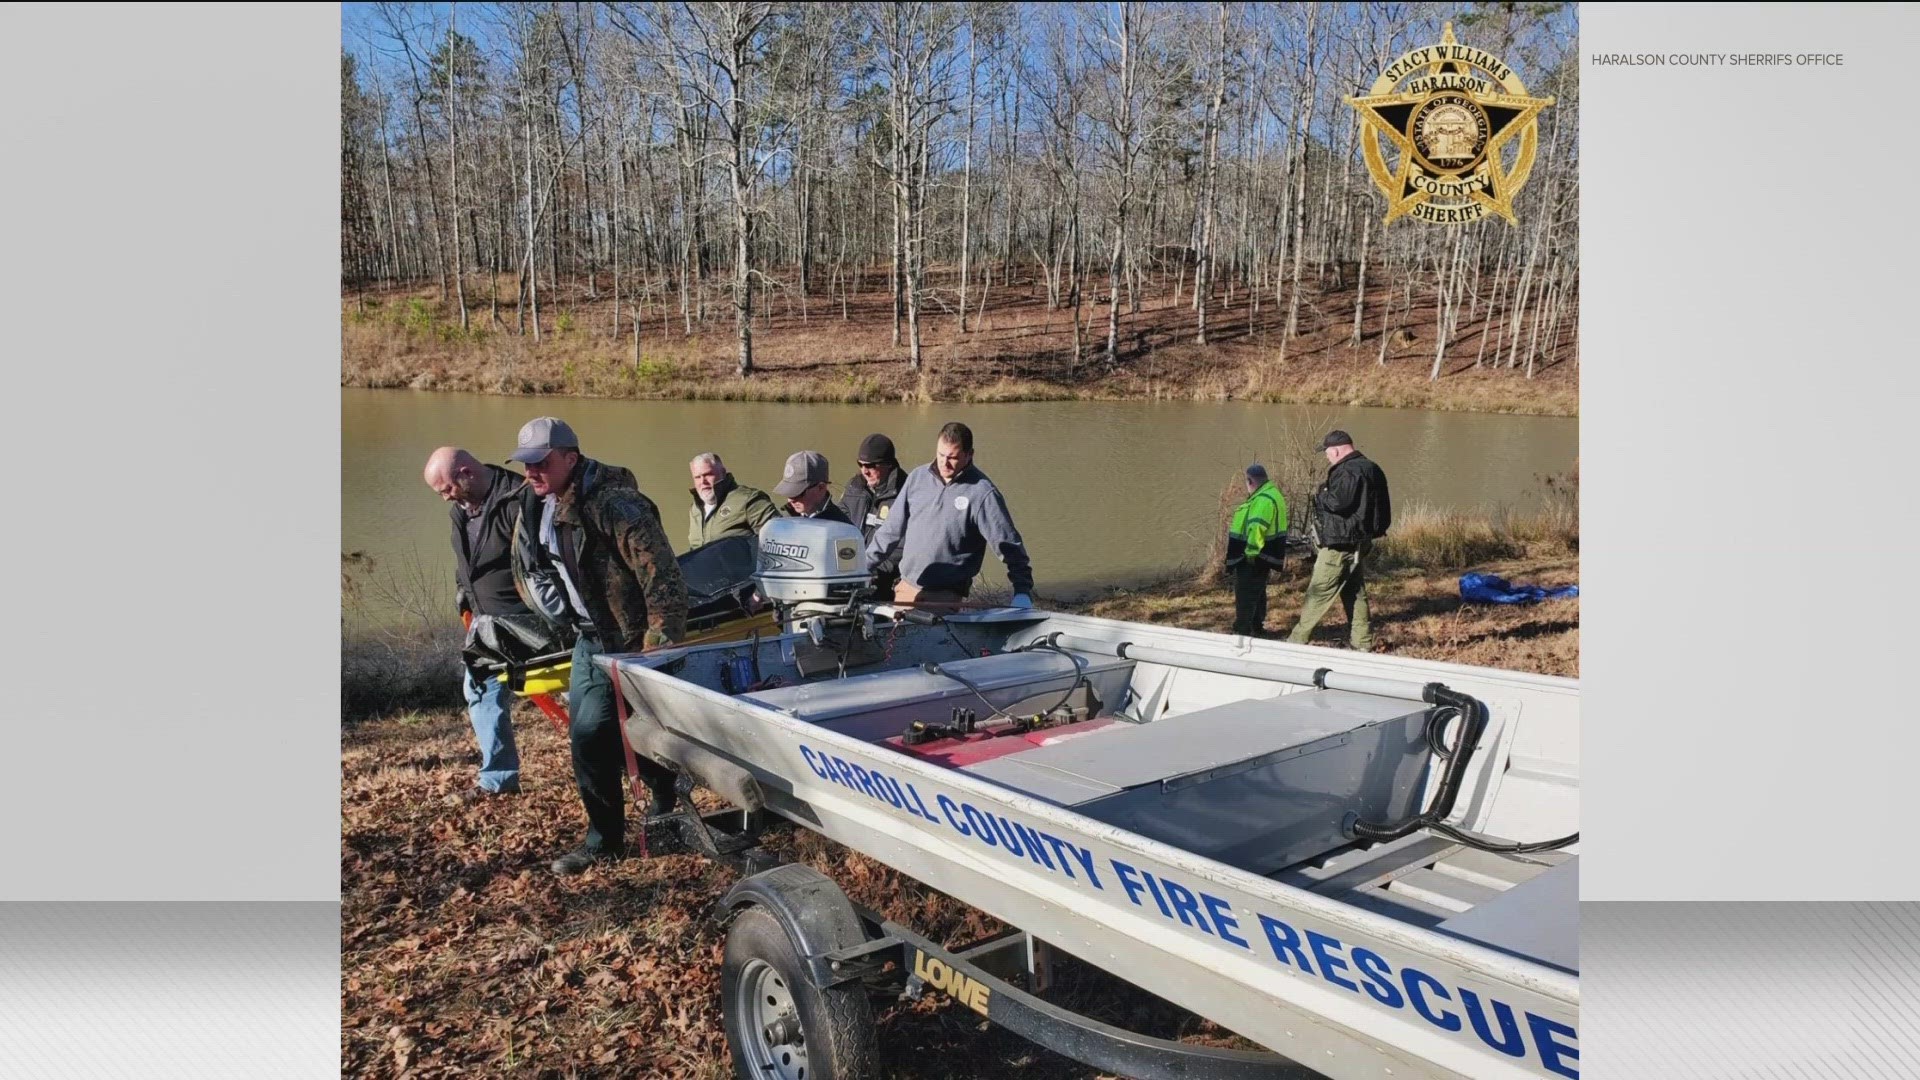 After the search lasted hours into the night, they stumbled upon the tractor near the edge of the lake on the property.